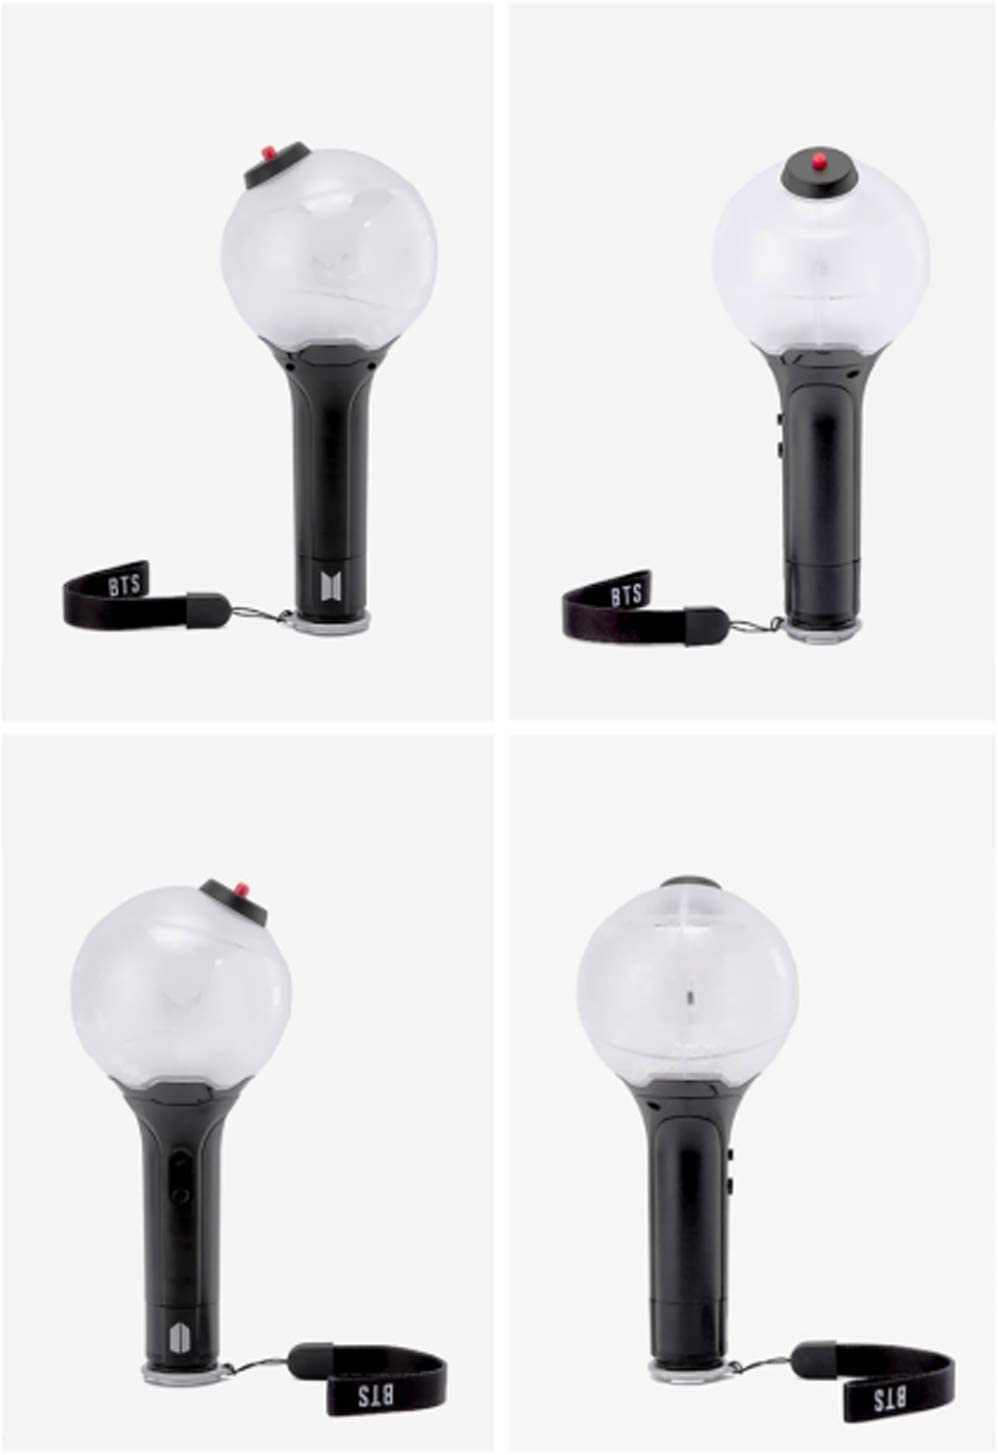 [OFFICIAL] BTS LIGHTSTICK/ARMY BOMB VERSION 3